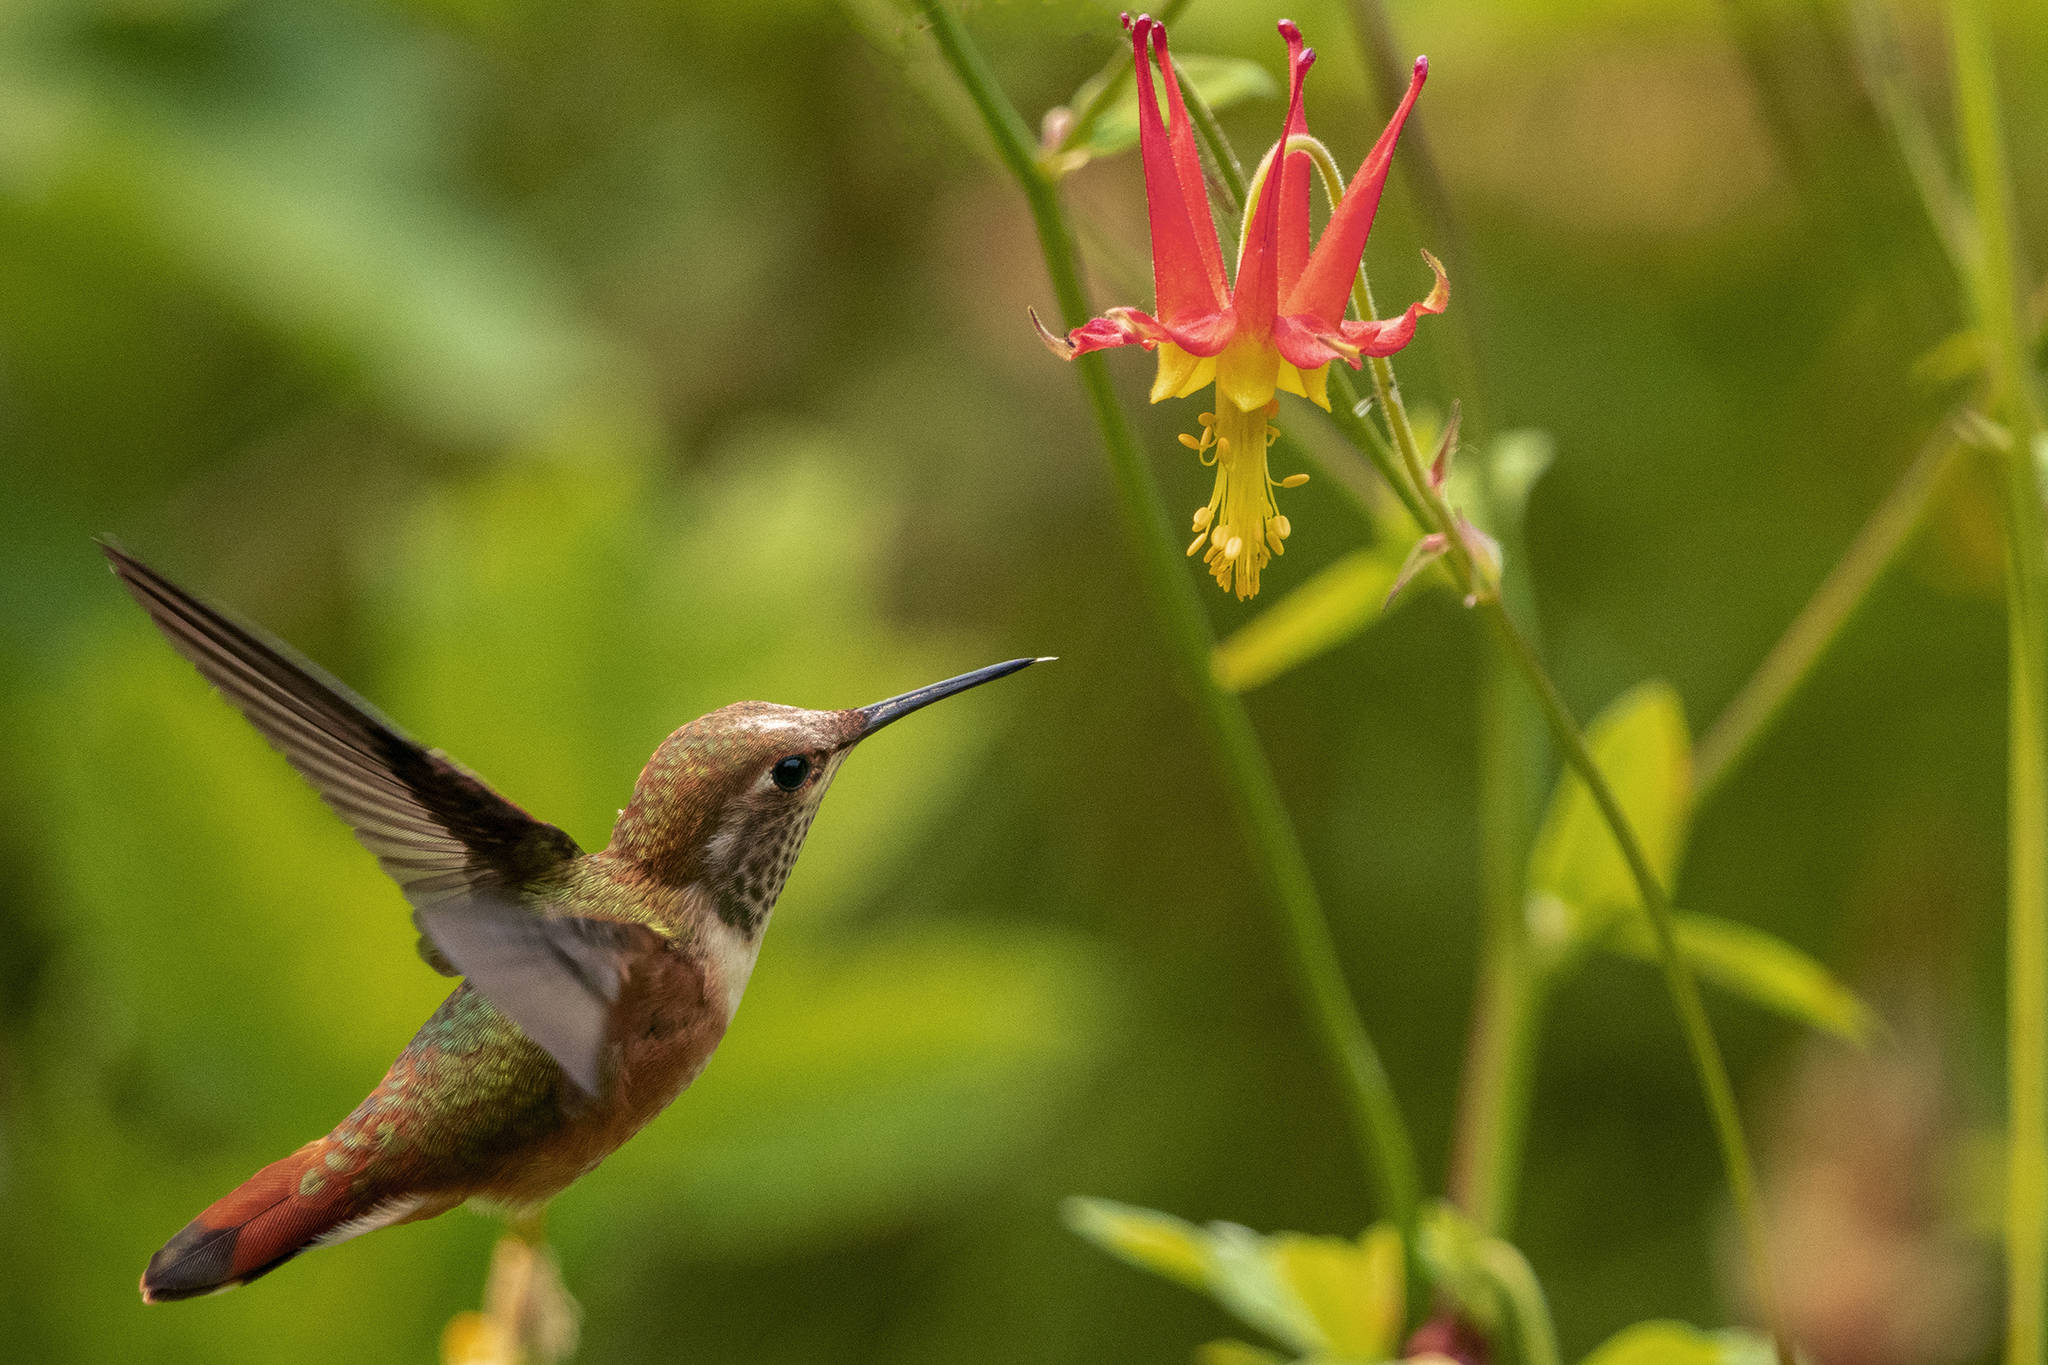 A hummingbird makes the rounds at the Jensen-Olson Arboretum on June 30, 2019. (Courtesy Photo | Janice Gorle)